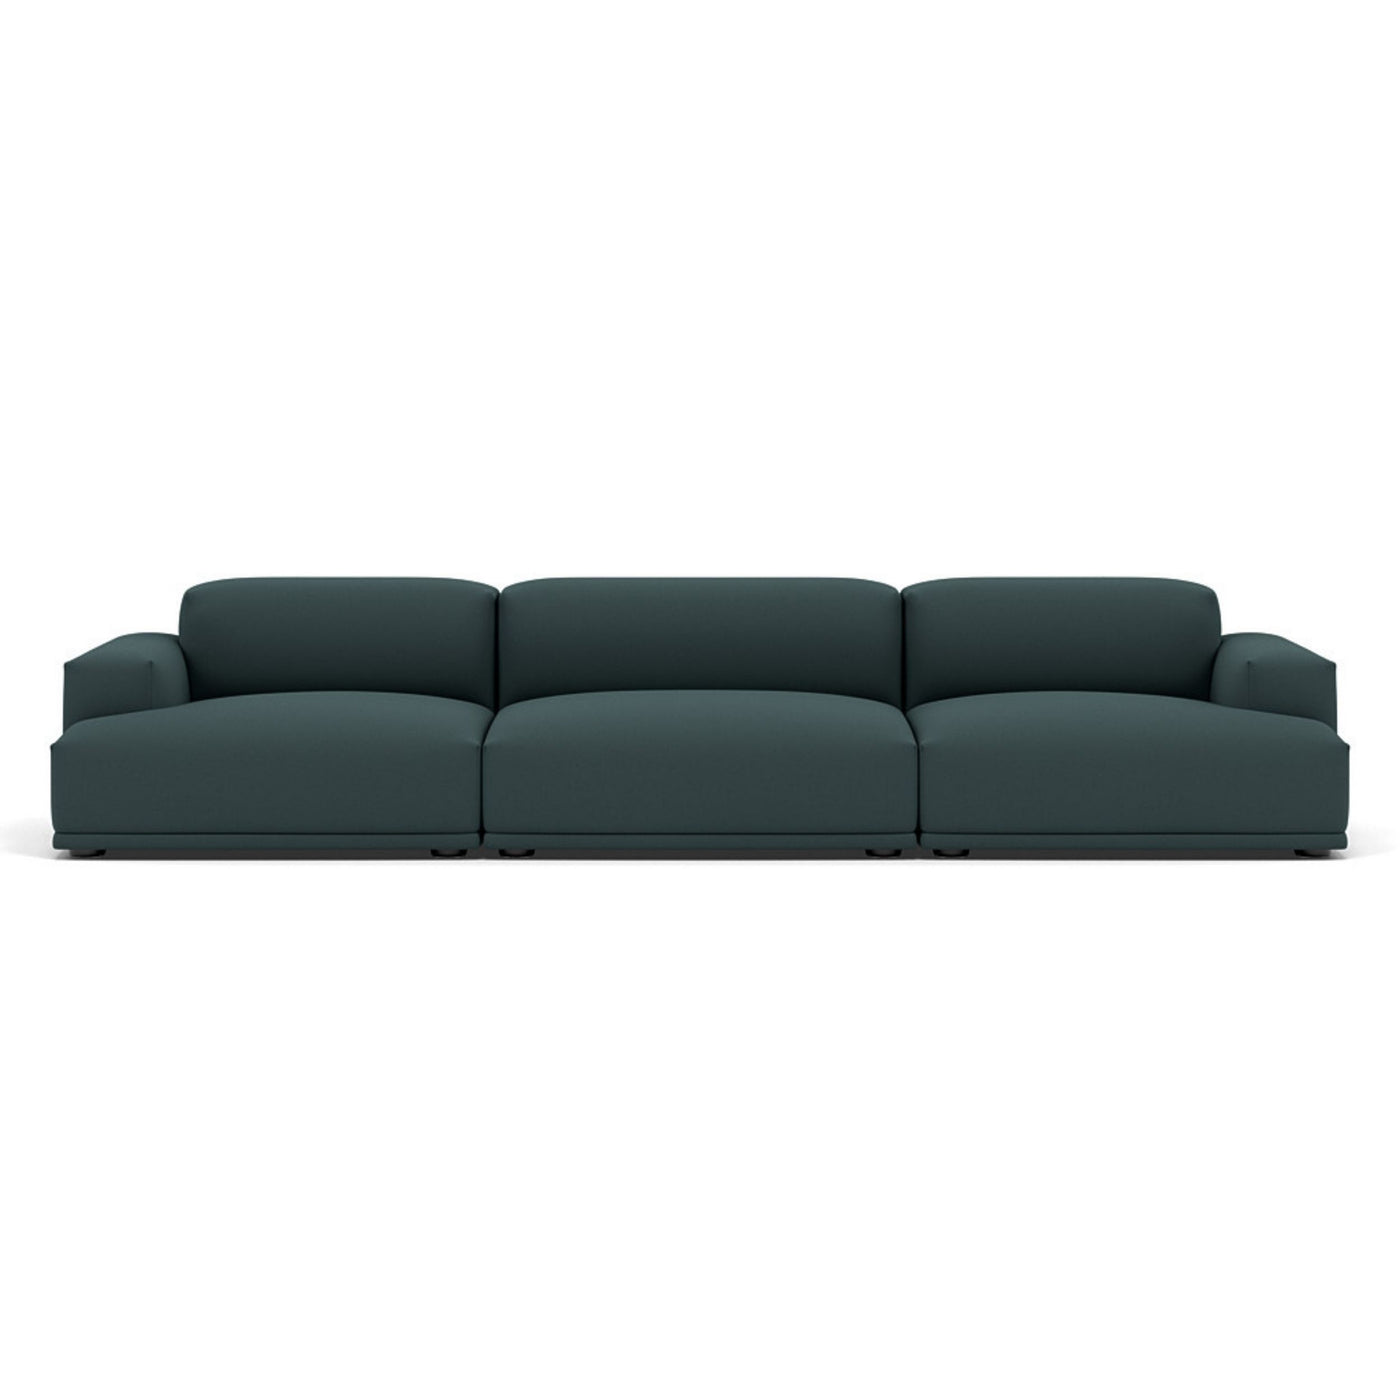 Muuto Connect modular sofa 3 seater. Made to order from someday designs.  #colour_steelcut-180